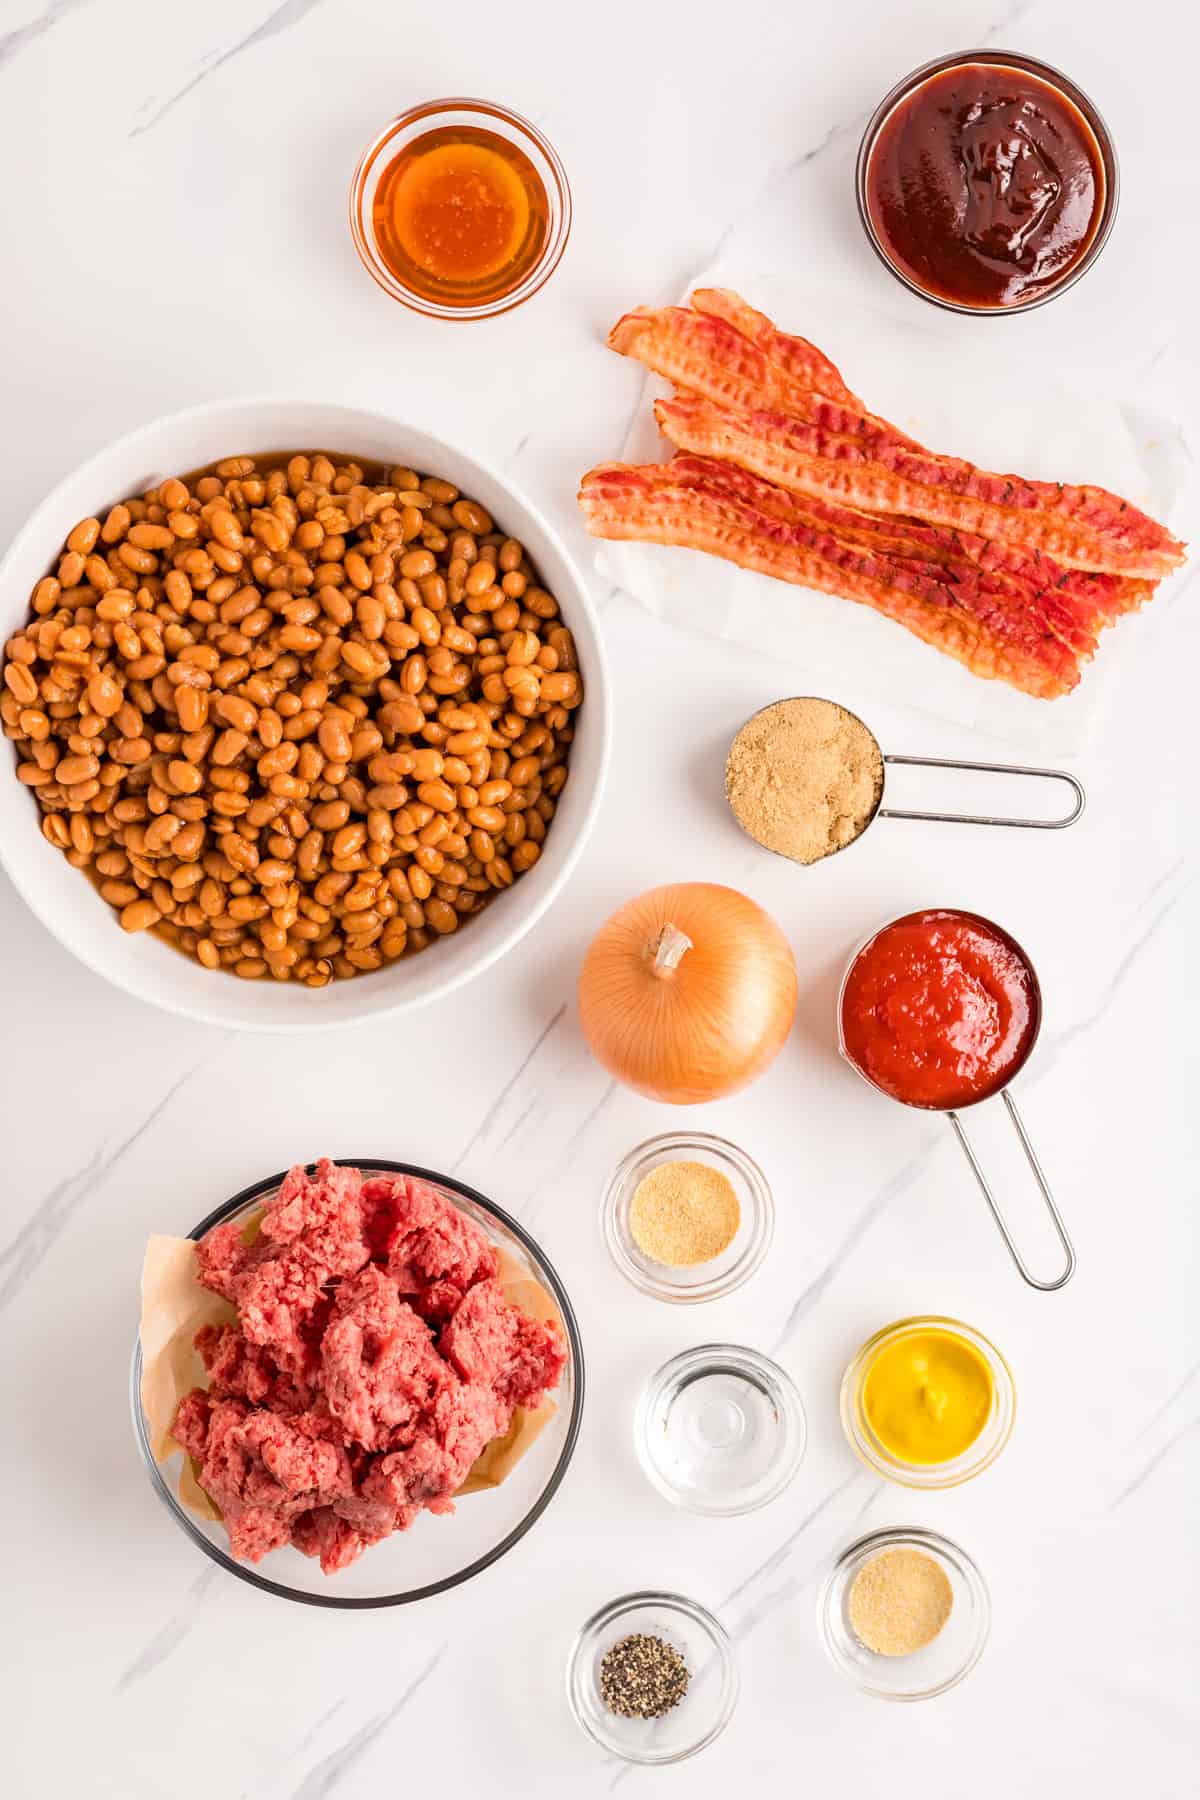 Ingredients need to make Baked Beans with Ground Beef.